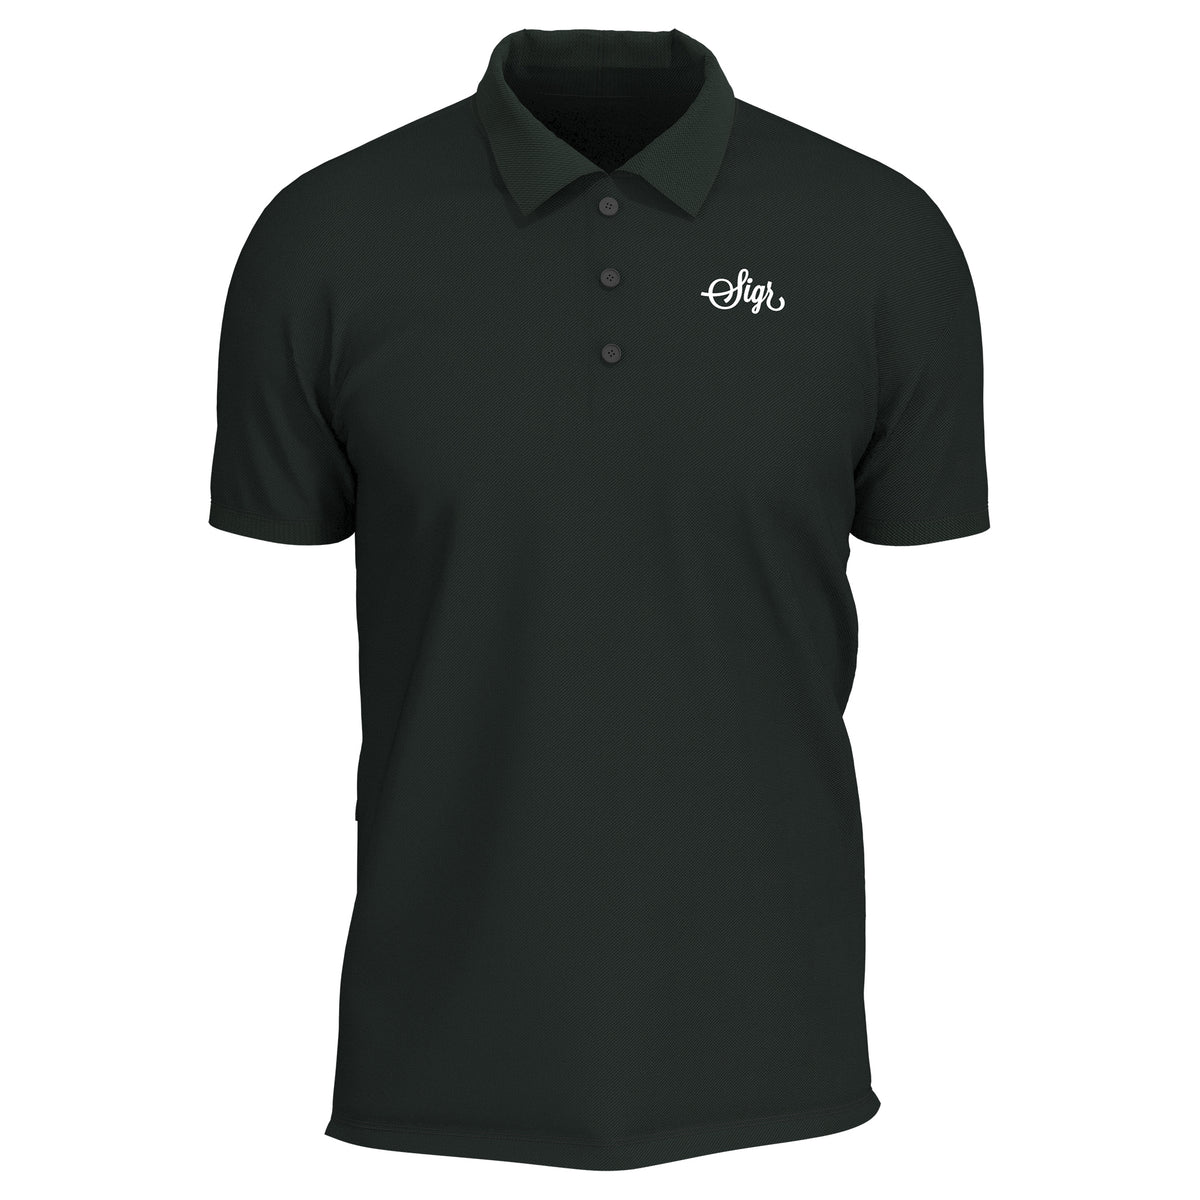 Dark Green Polo Shirt with Sigr Logo for Men -'Pike' by Sigr